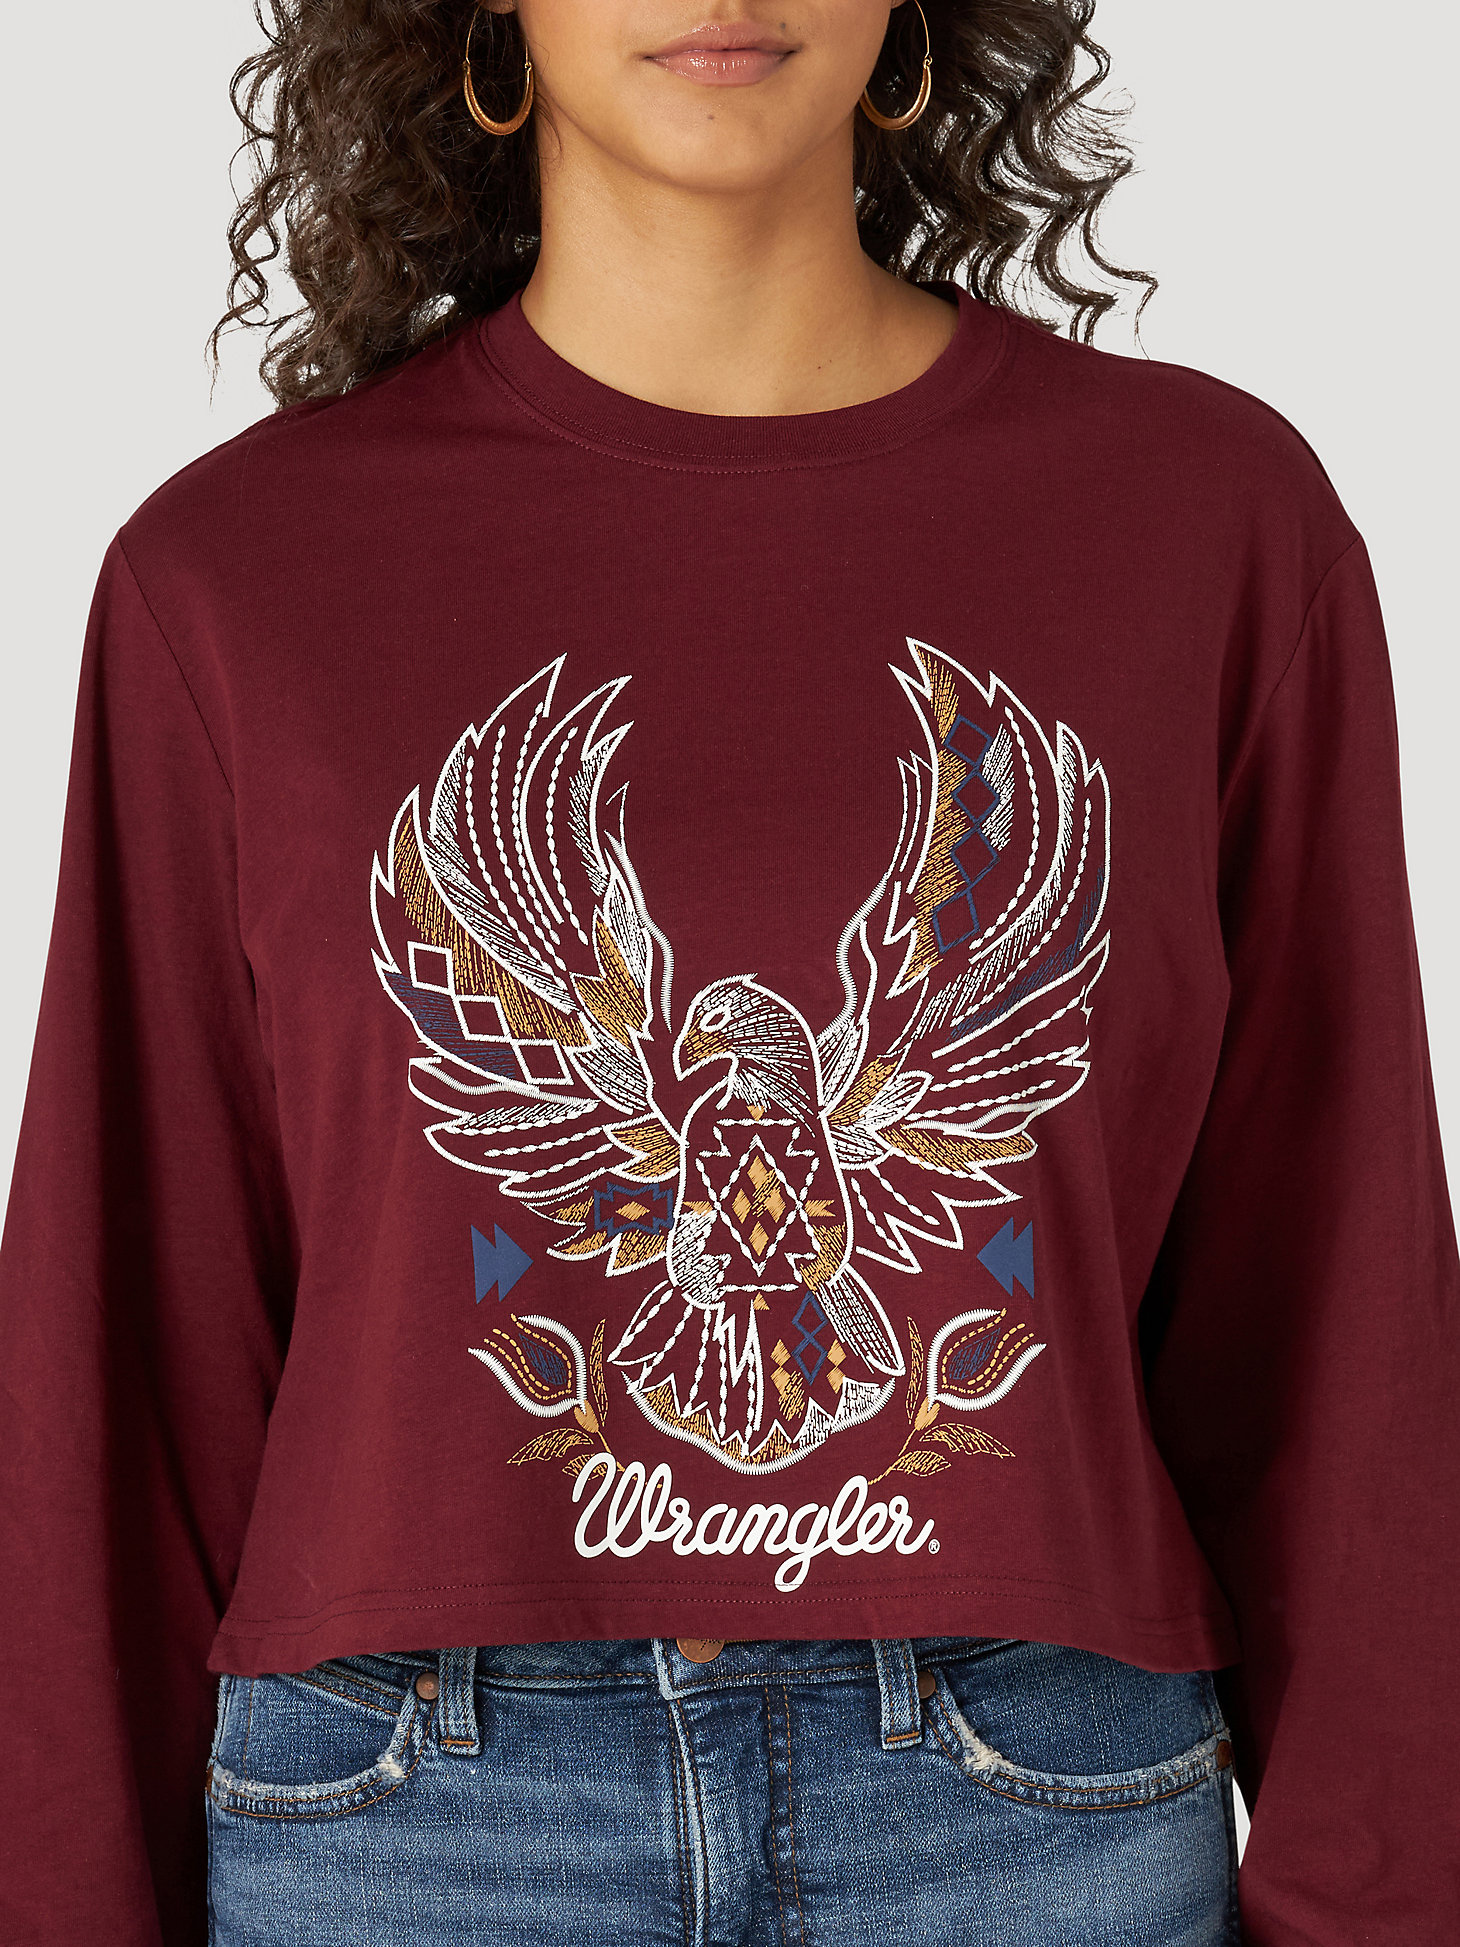 Womens Retro LS Cropped Tribal Eagle Graphic Tee in Zinfandel alternative view 2